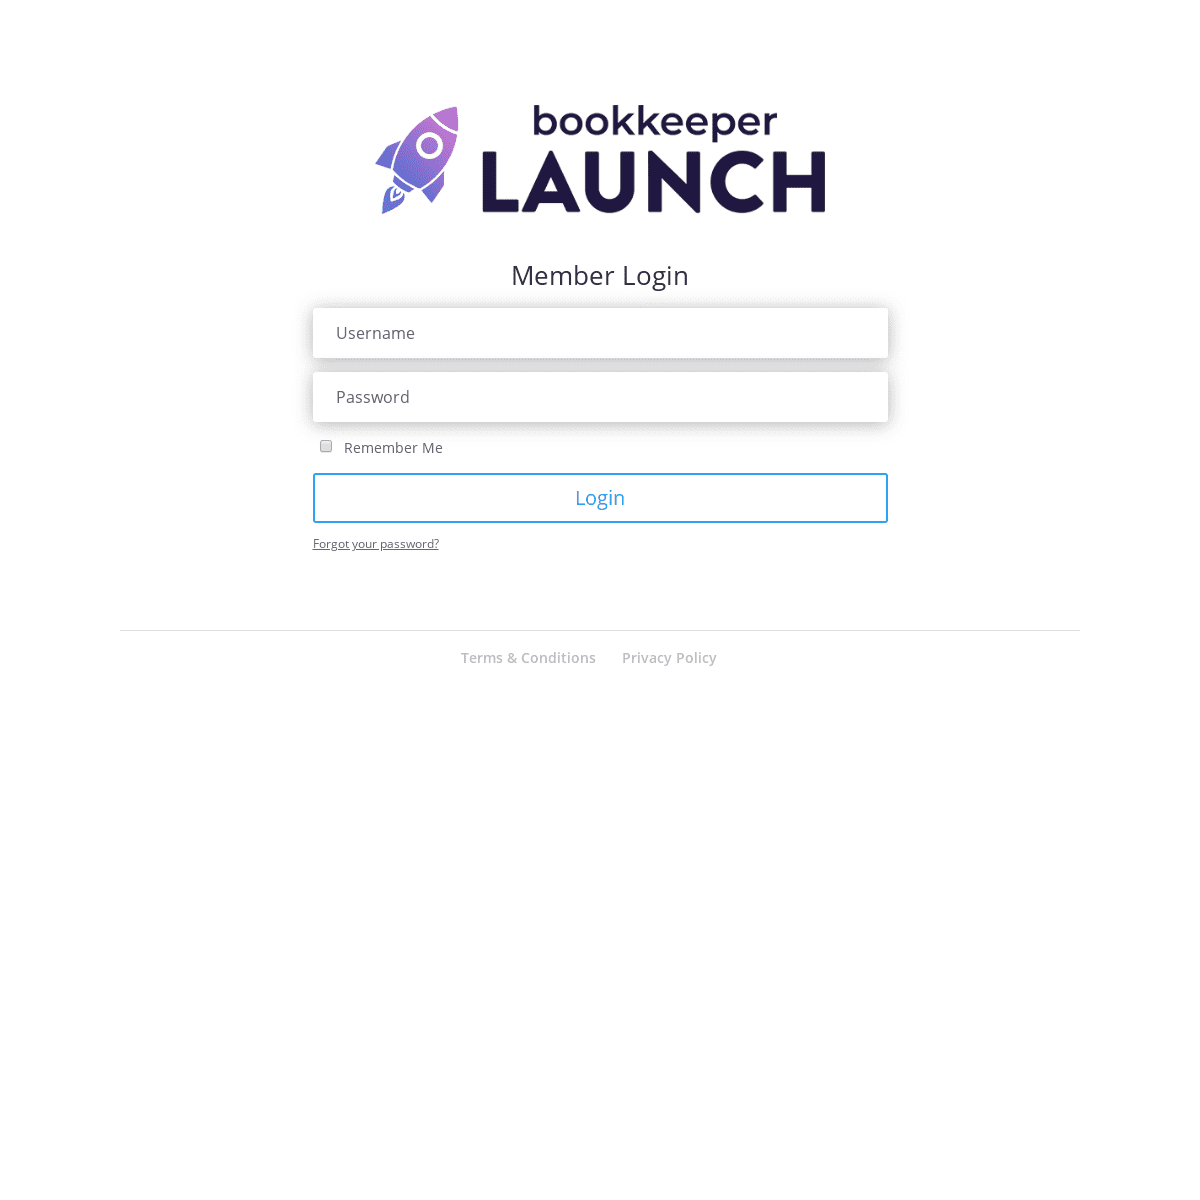 A complete backup of bookkeeperlaunch.com